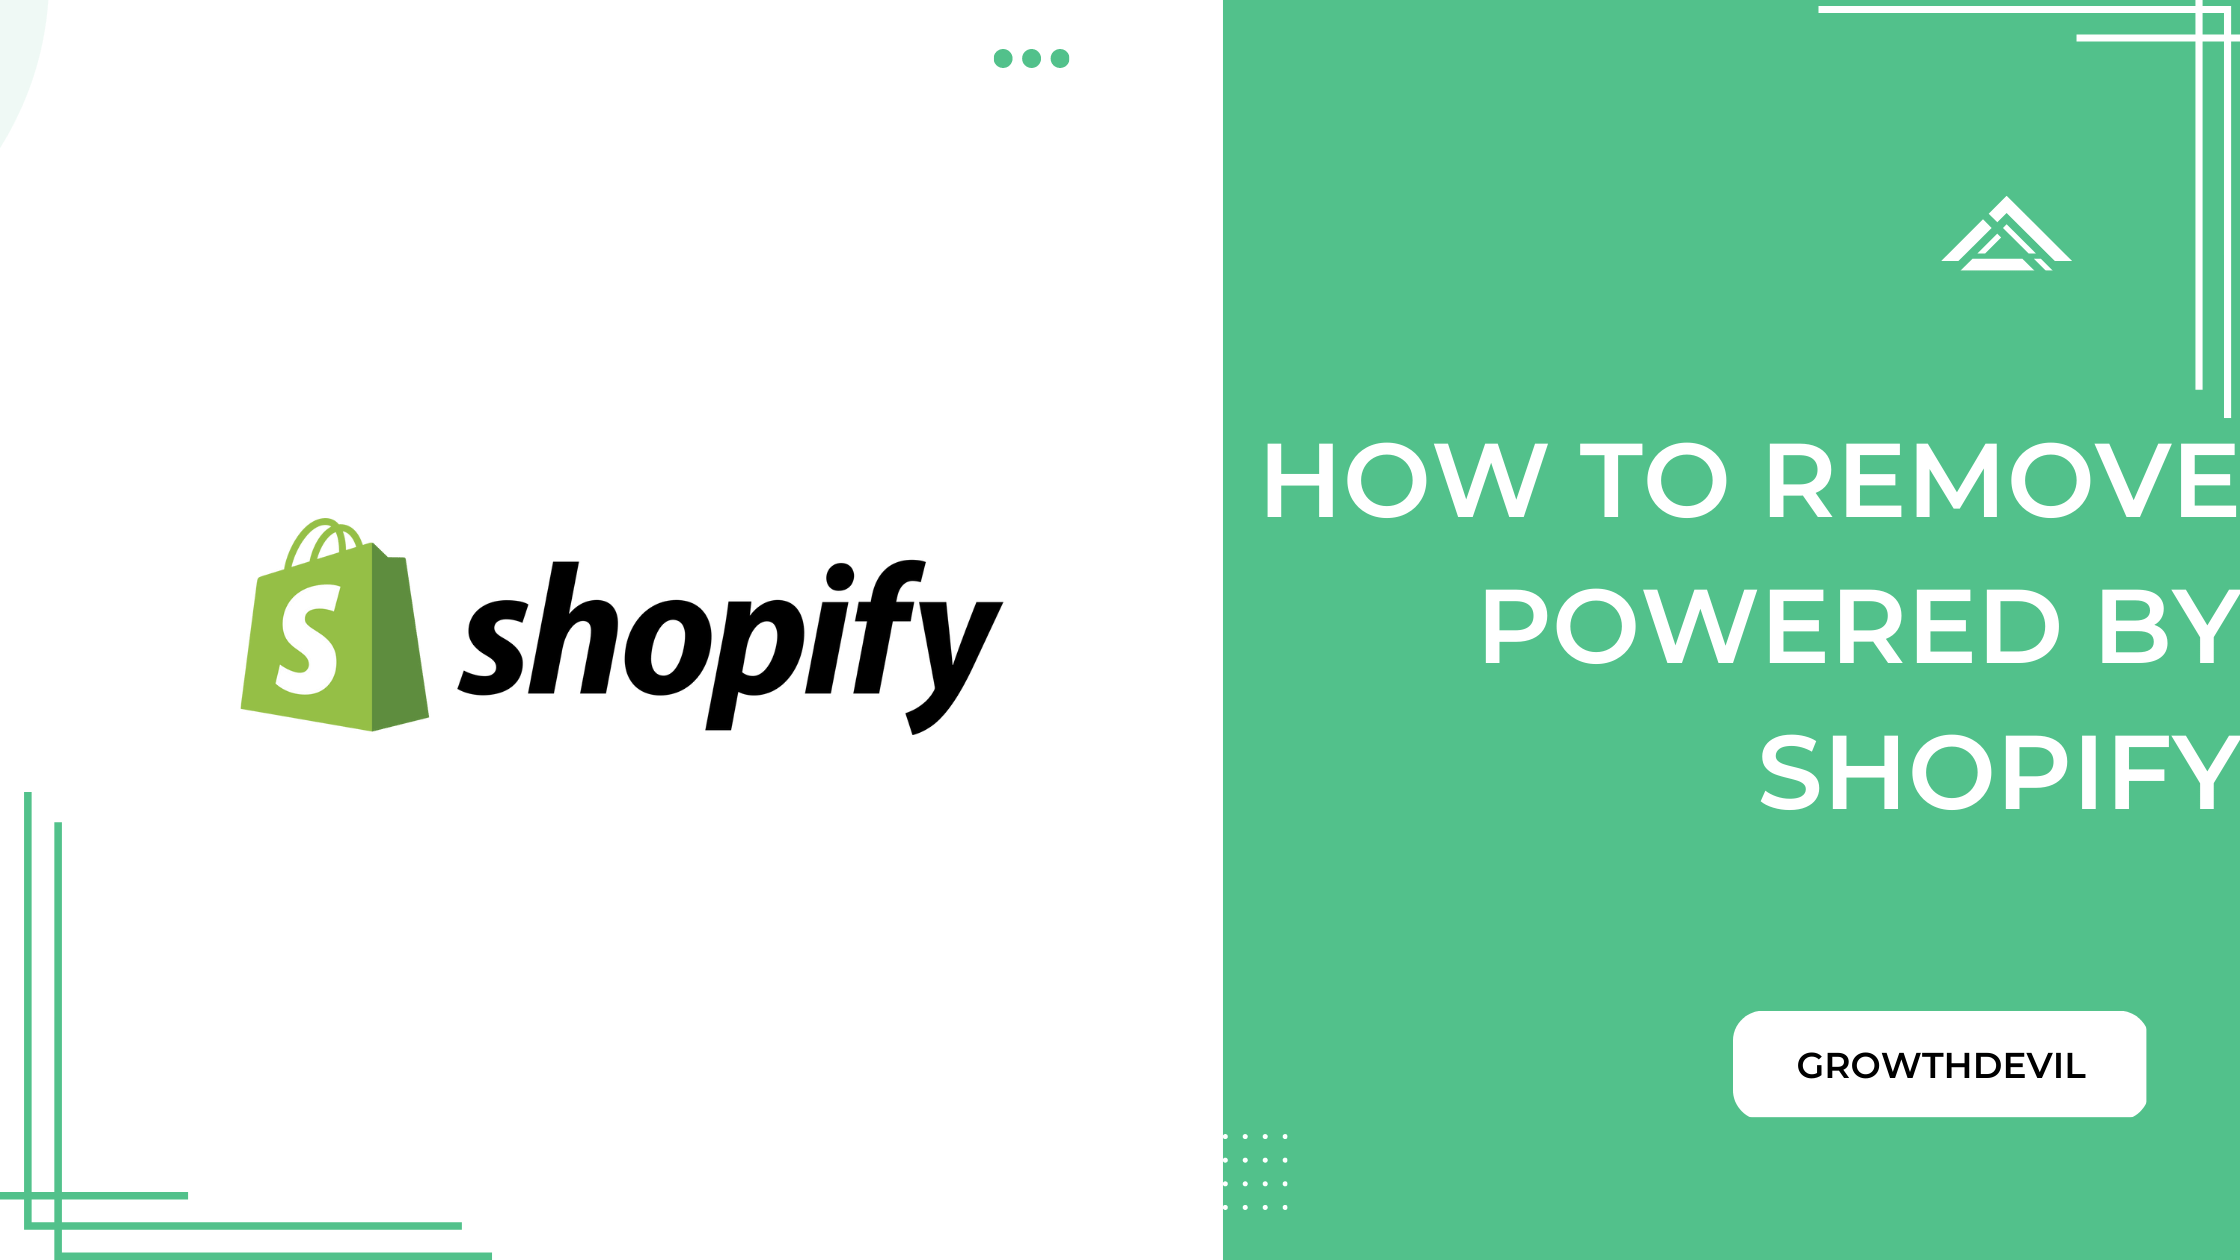 How To Remove Powered By Shopify - GrowthDevil